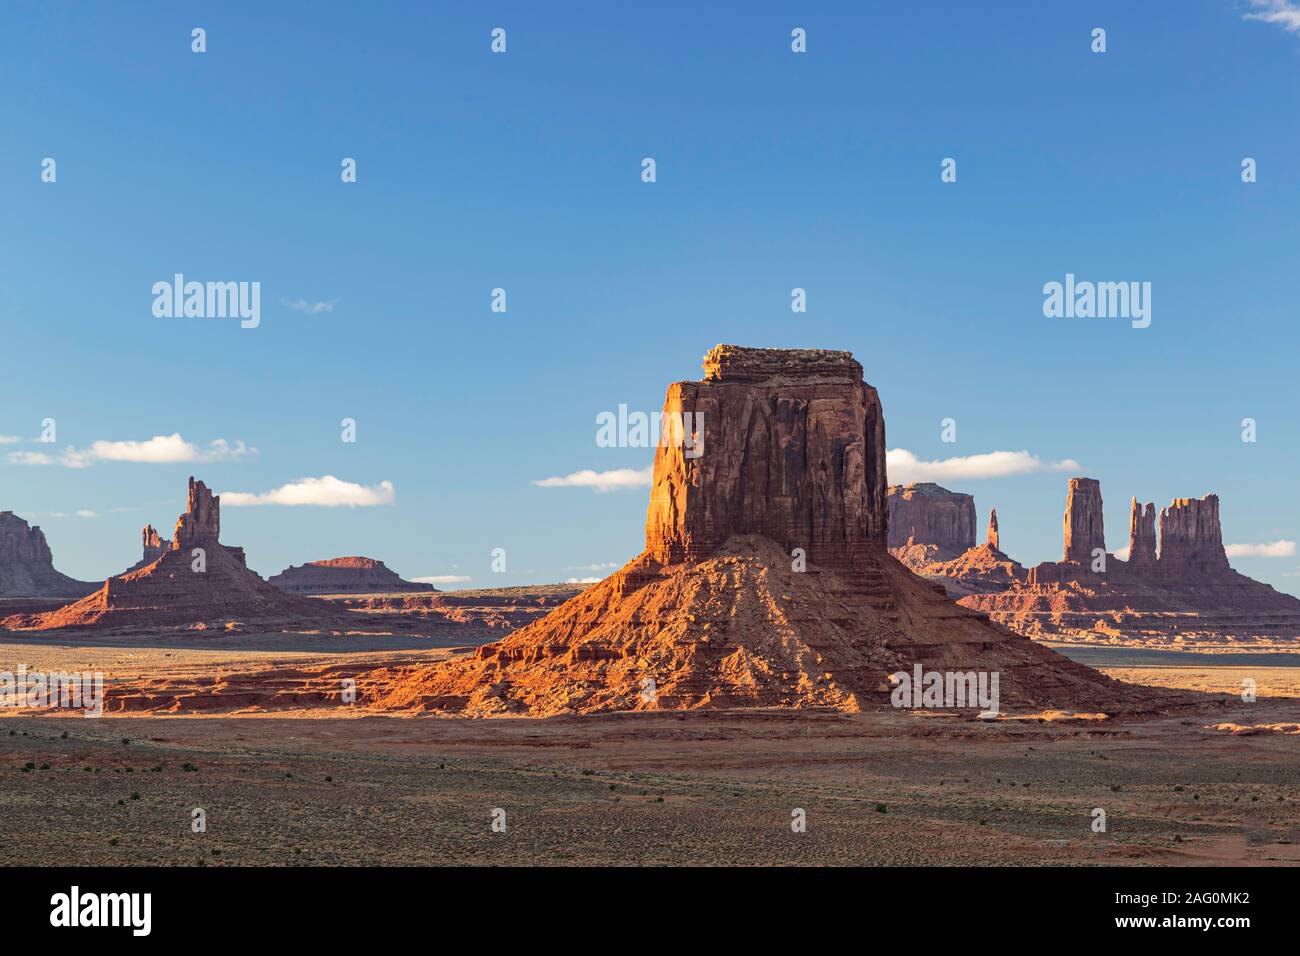 Merrick Butte from Artist's Point Overlook, Monument Valley, Utah and Arizona border, USA Stock Photo